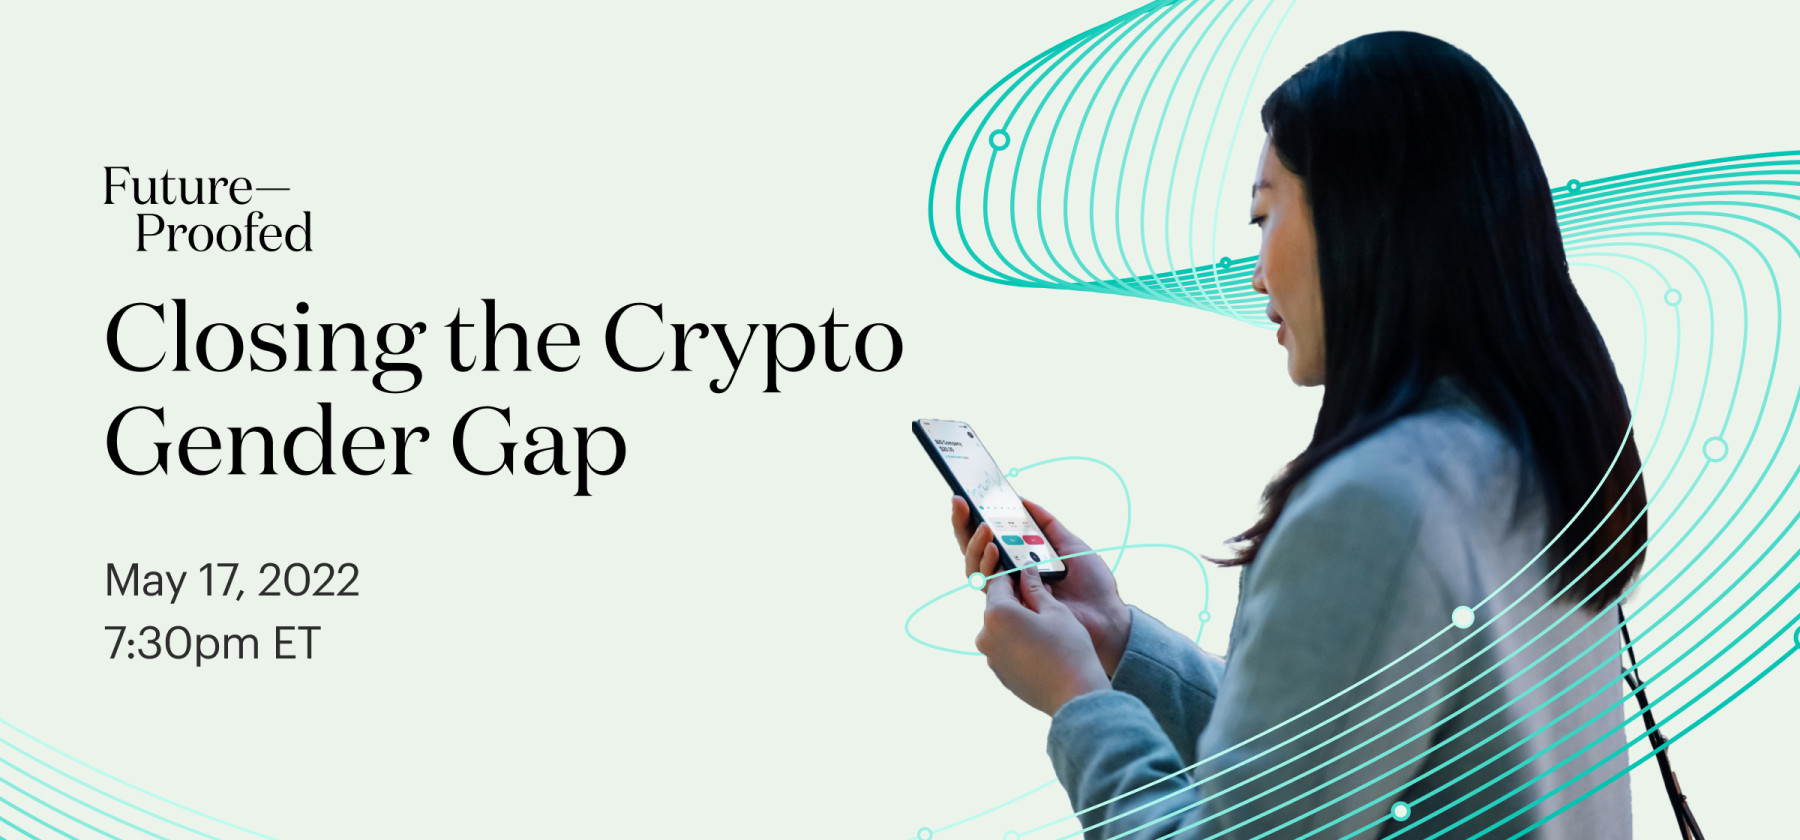 Future-Proofed Closing the Crypto Gender Gap May 17, 2022 7:30pm ET